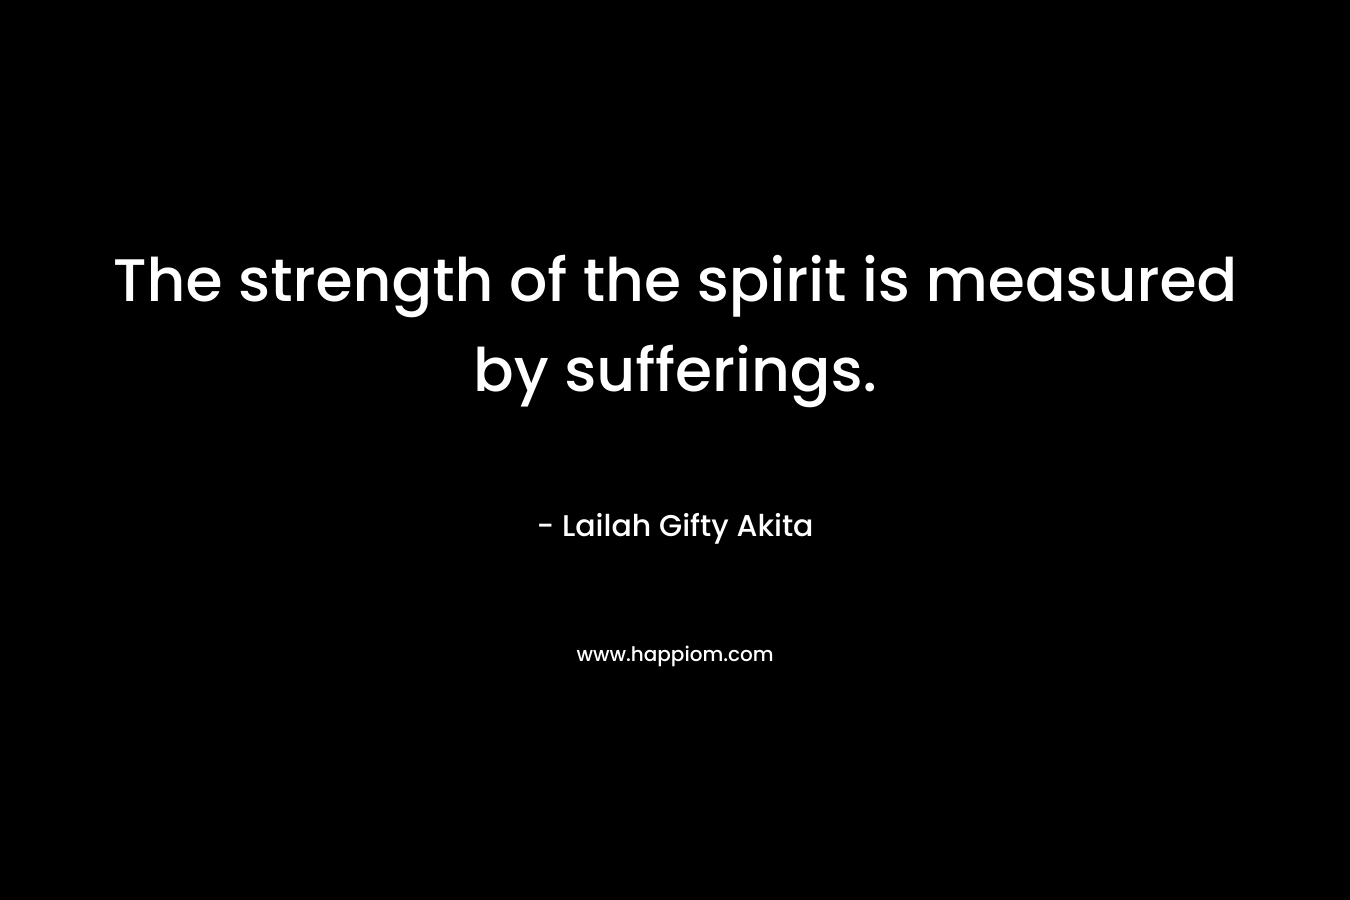 The strength of the spirit is measured by sufferings.